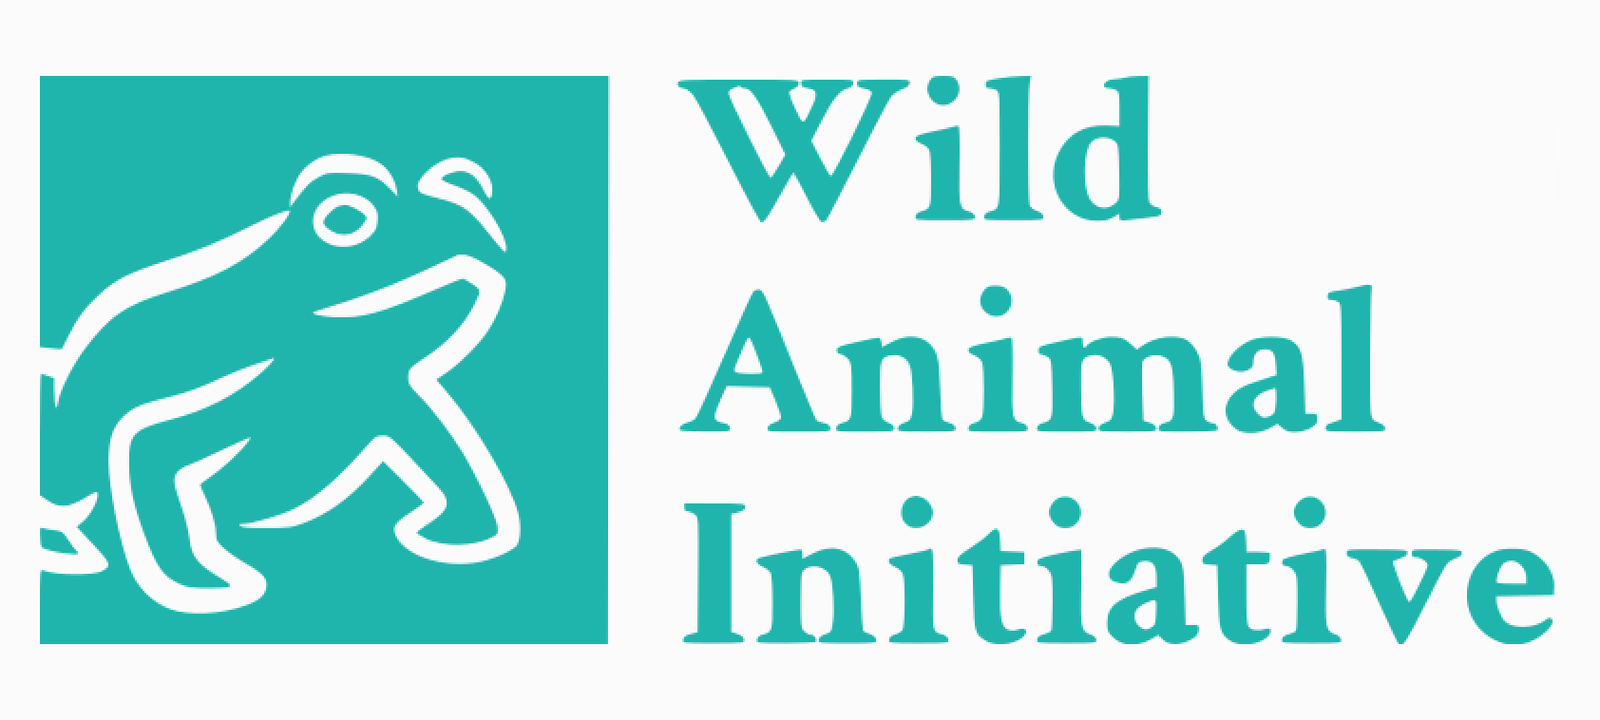 Election Candidate: Wild Animal Initiative